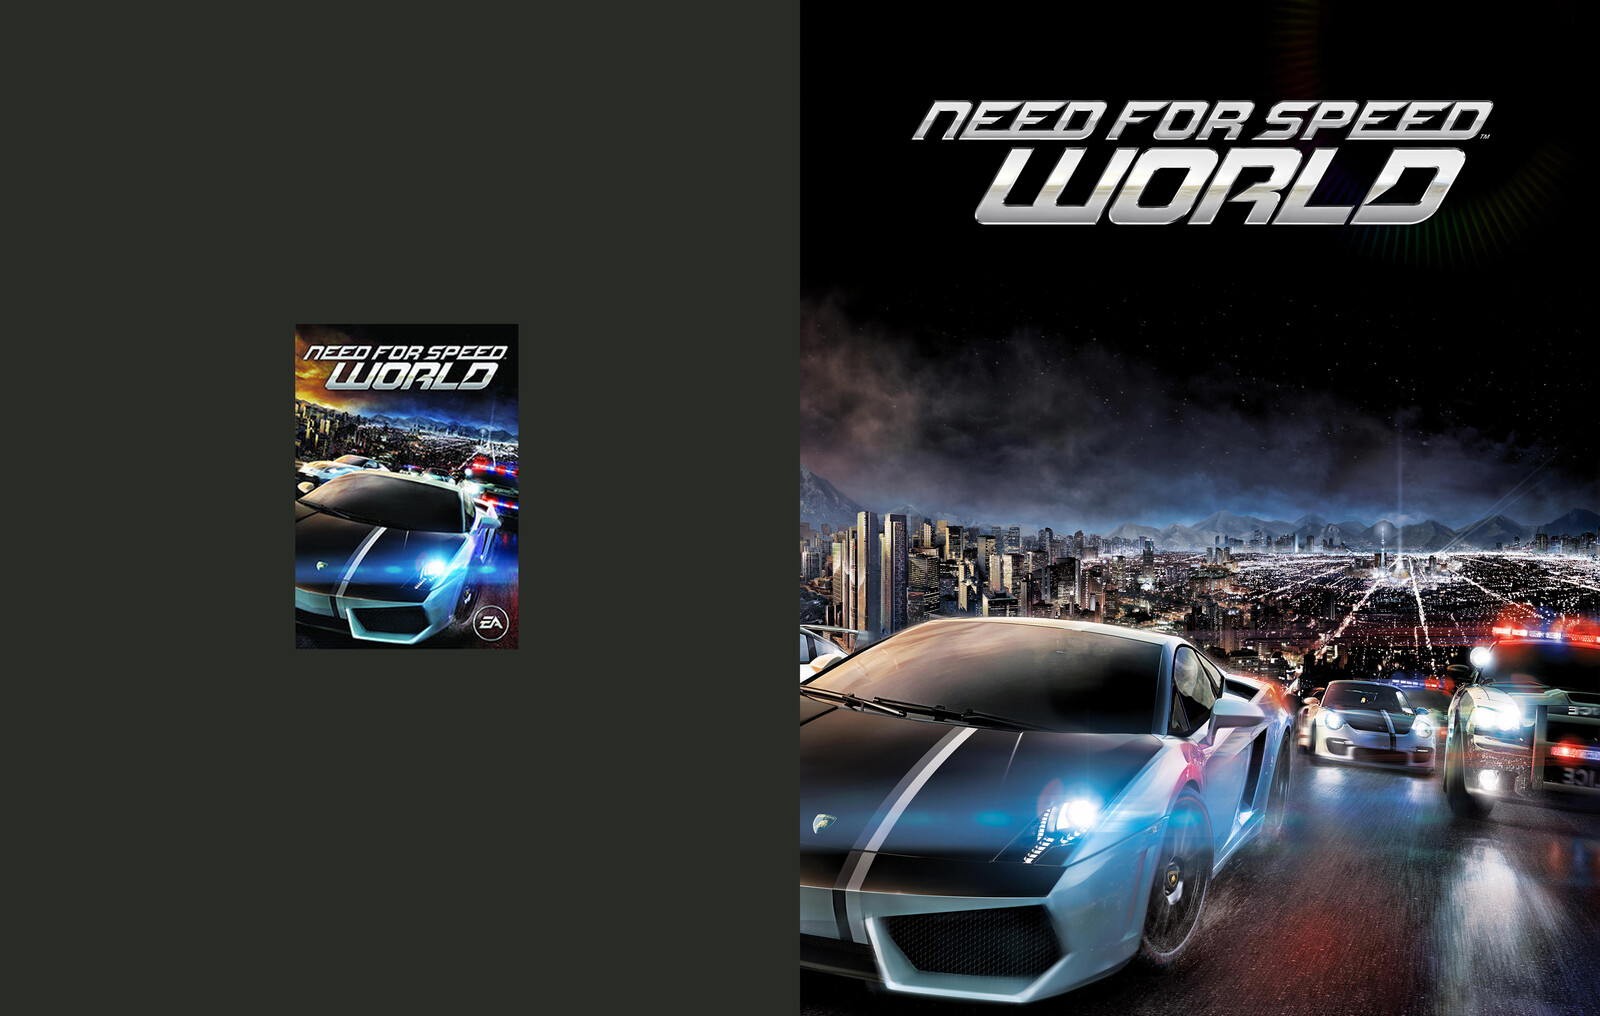 Need for Speed World (Original Scan vs. Poster format)